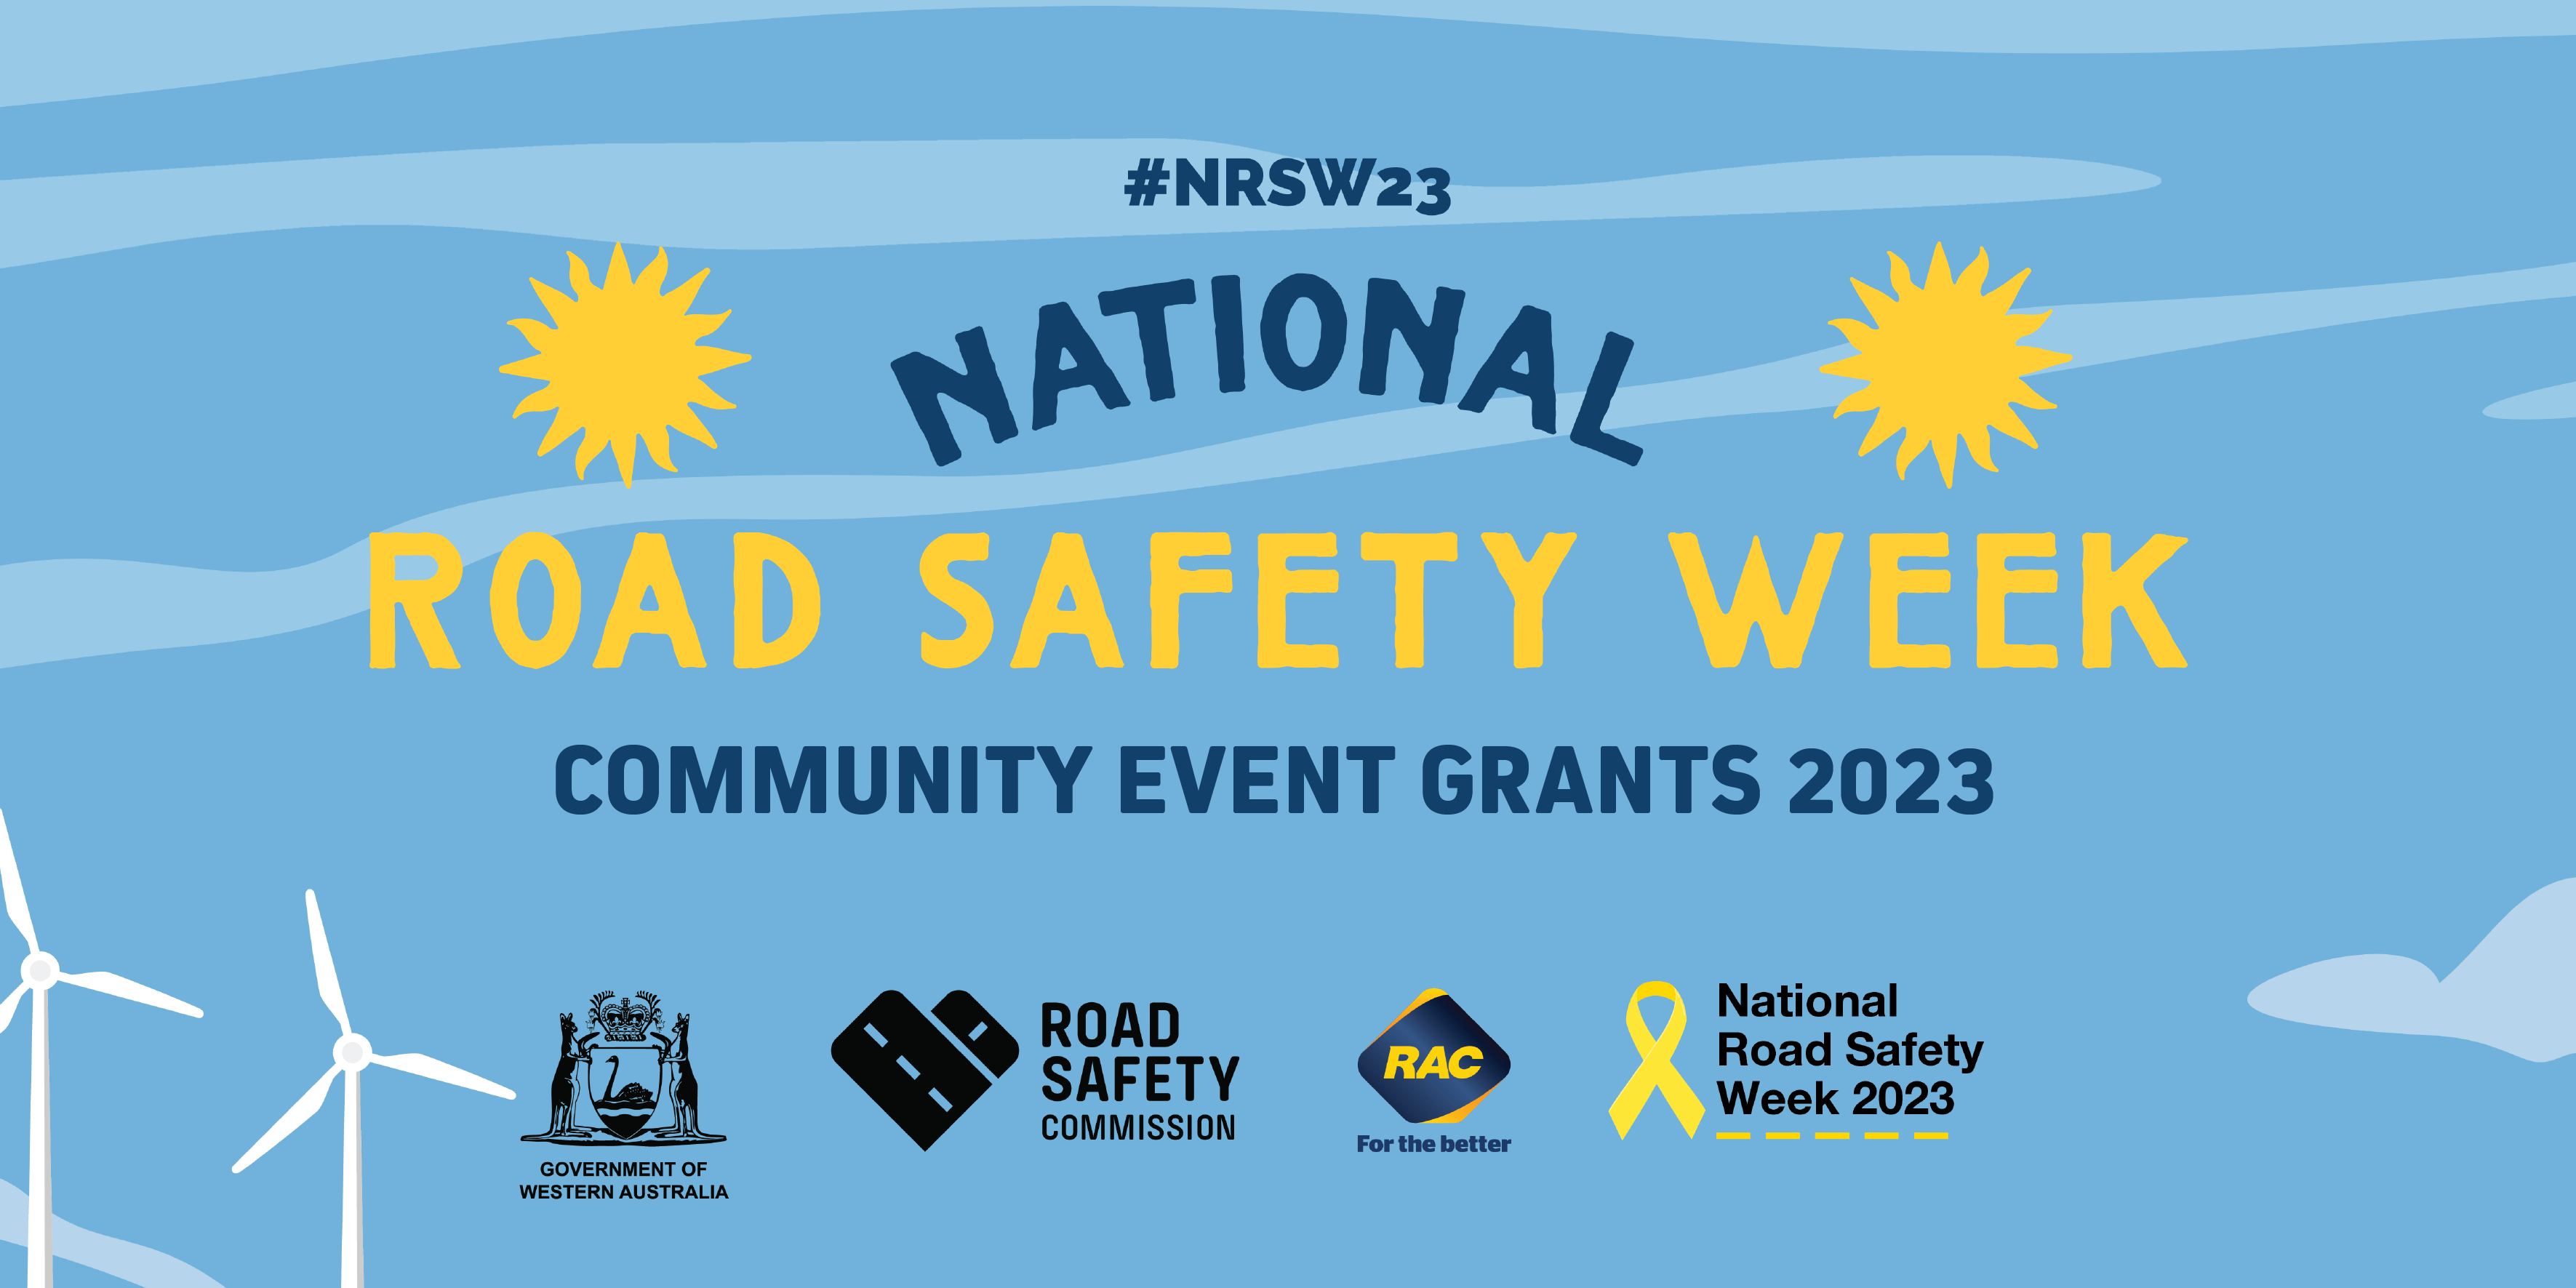 National Road Safety Week 2023